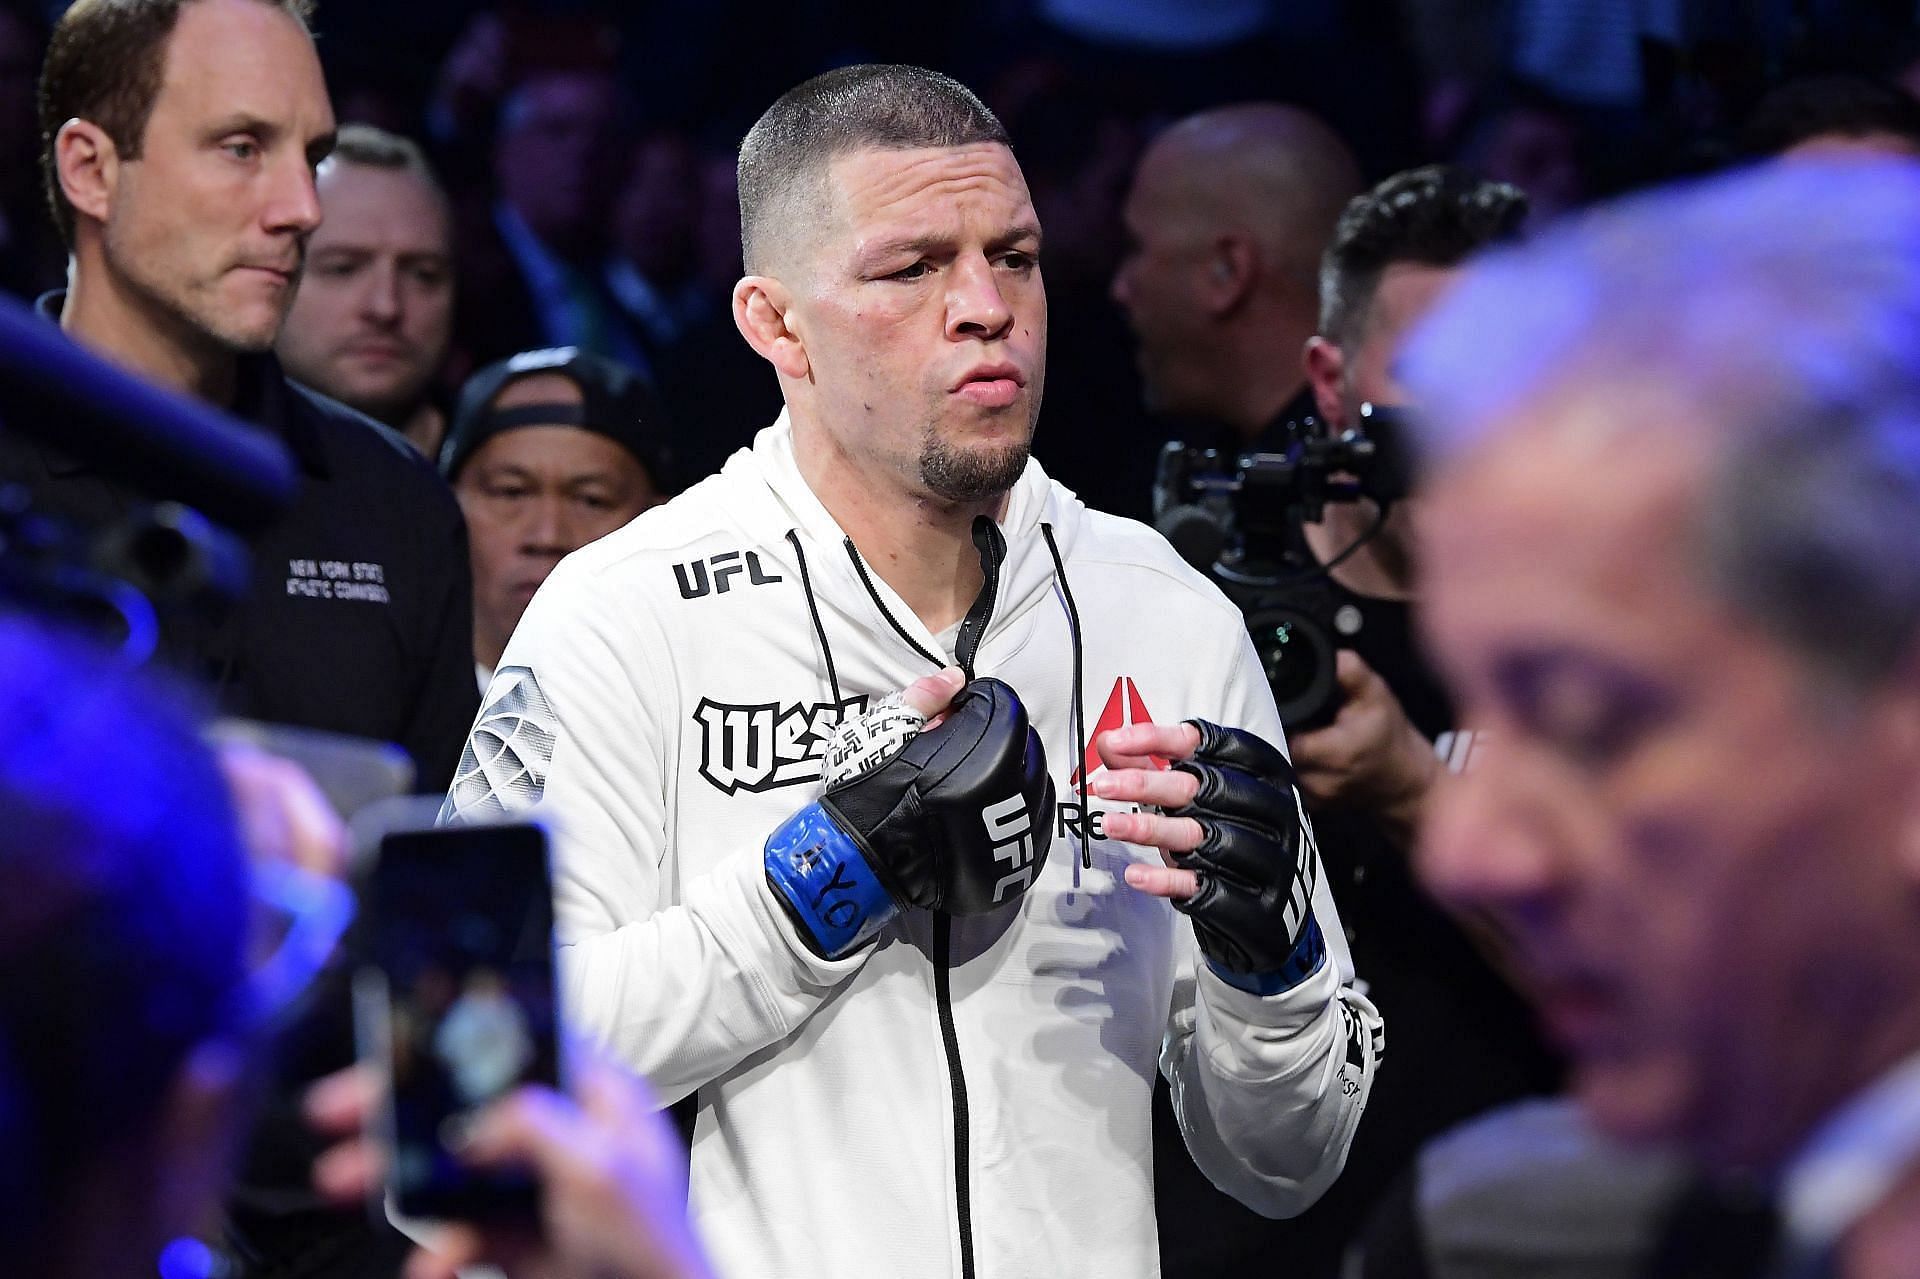 Nate Diaz before entering the octagon at UFC 244